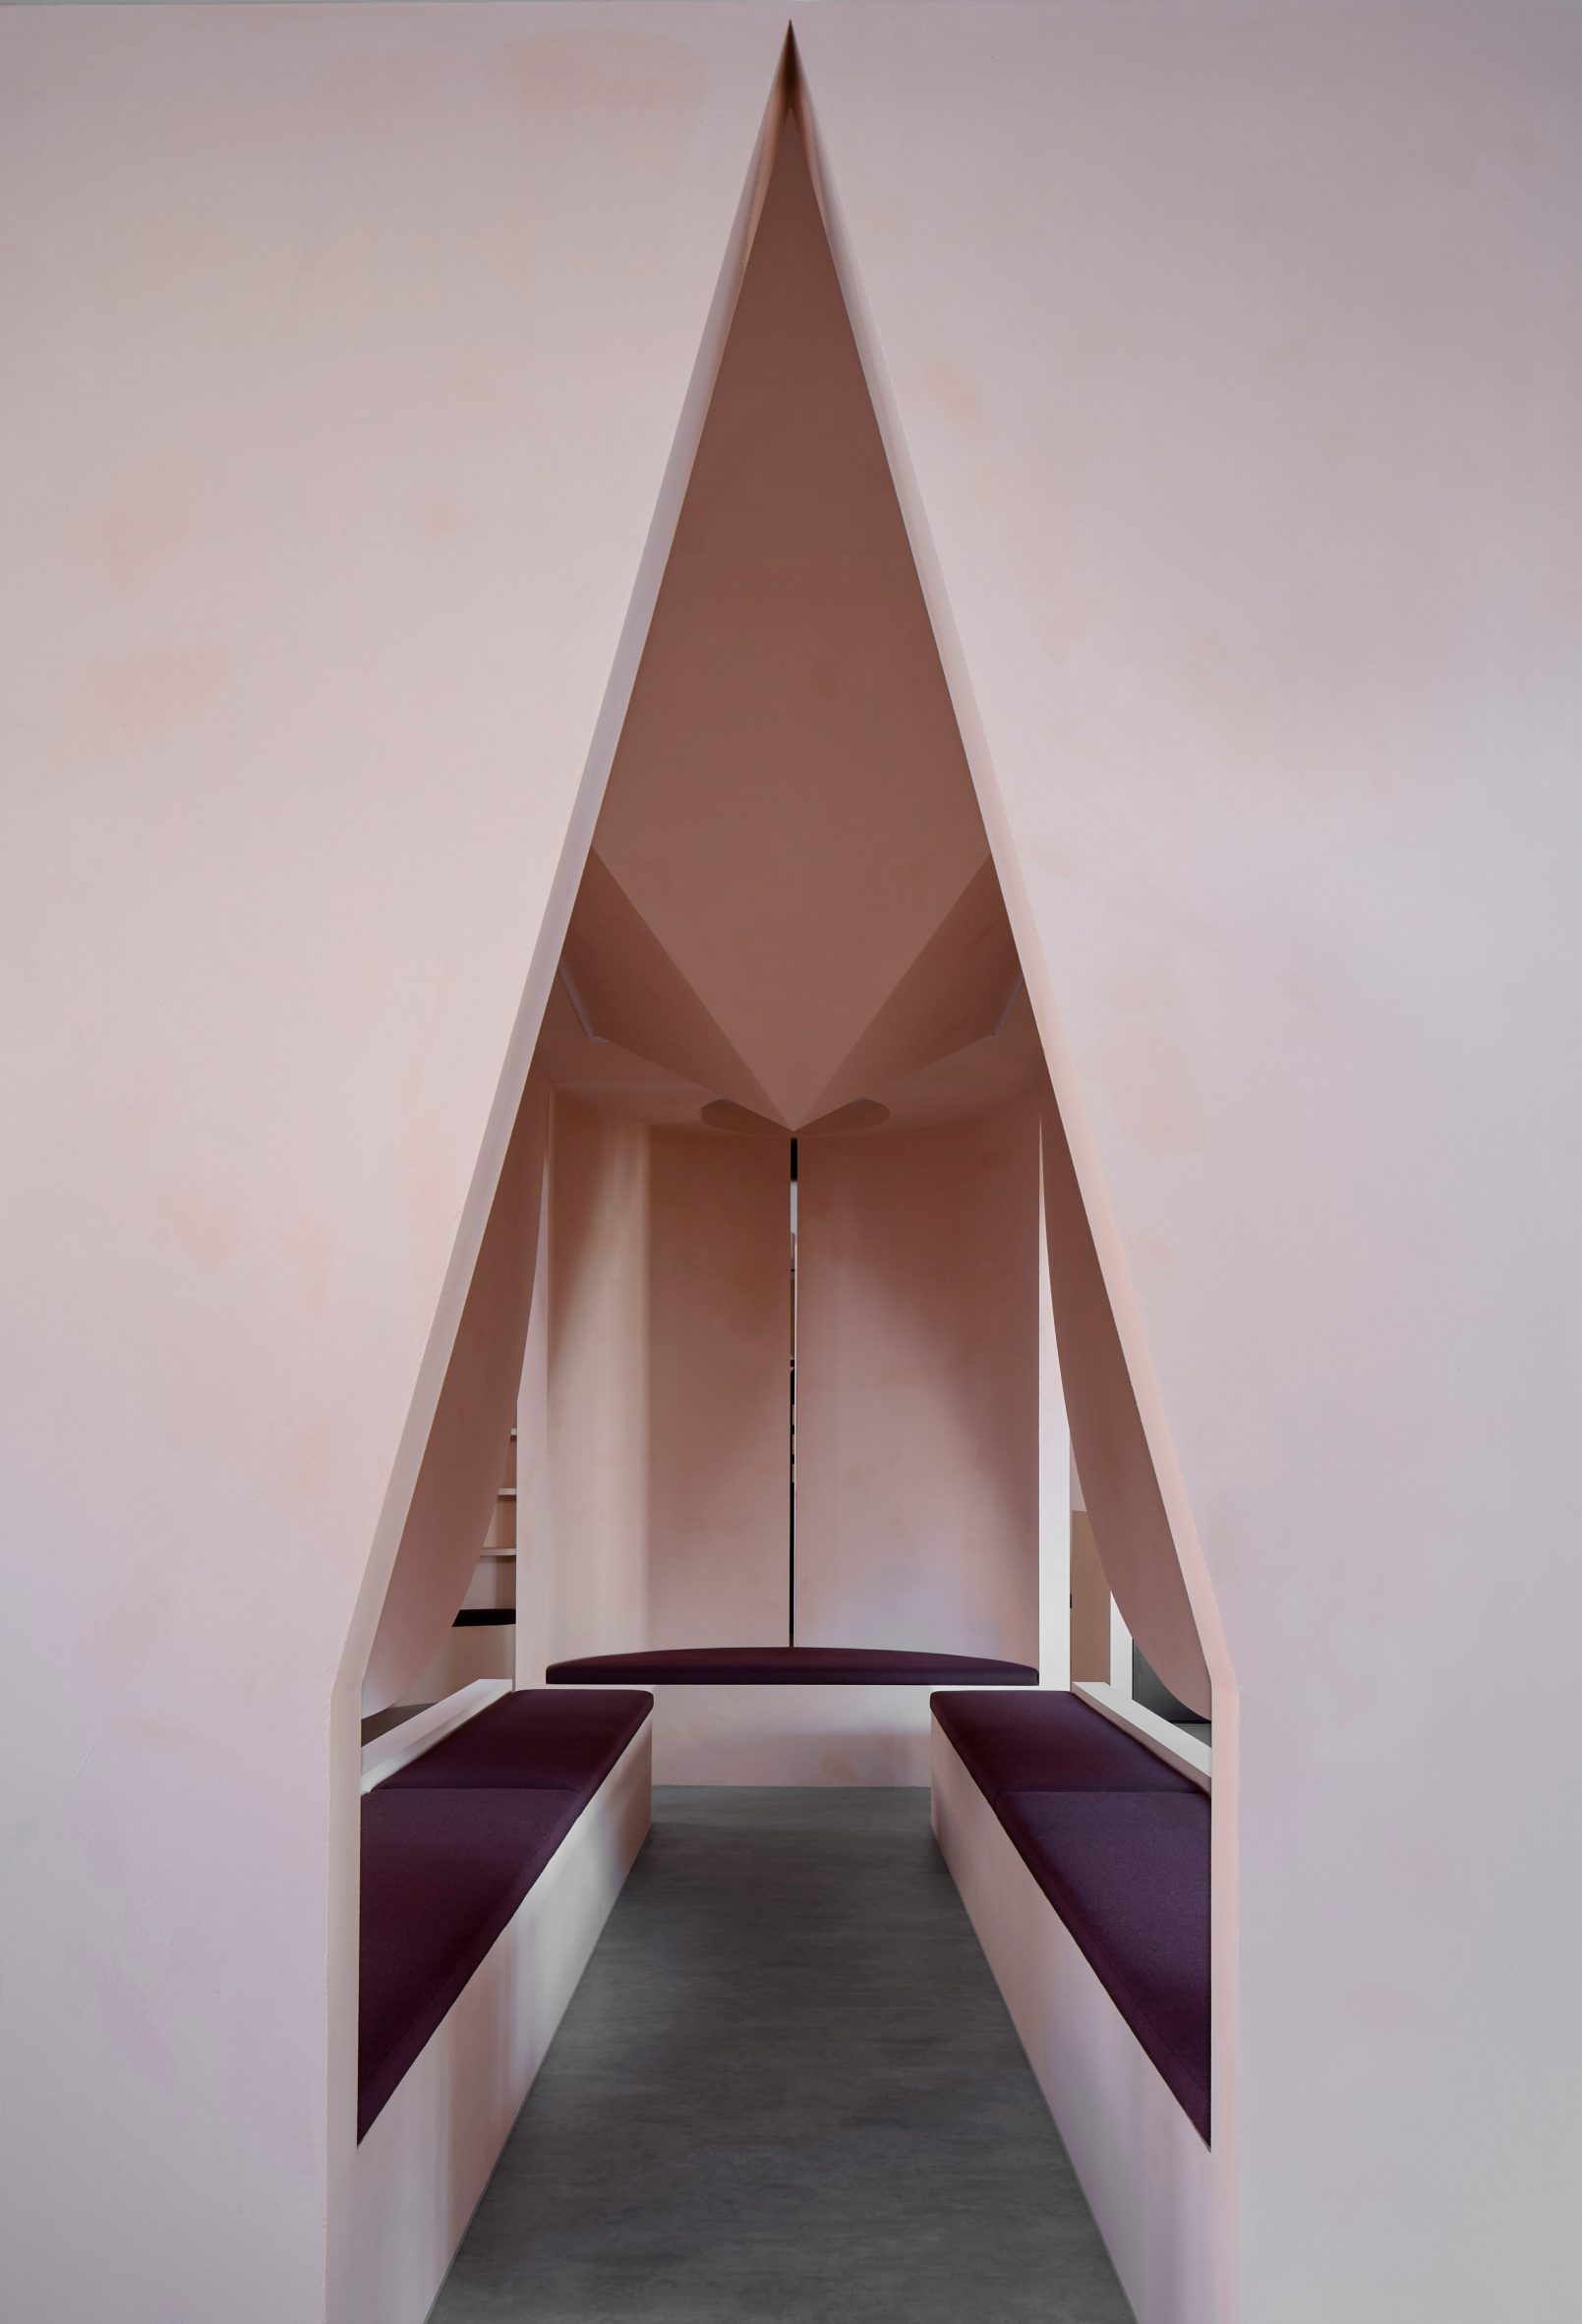 A pointed arch opening into a space for reflection